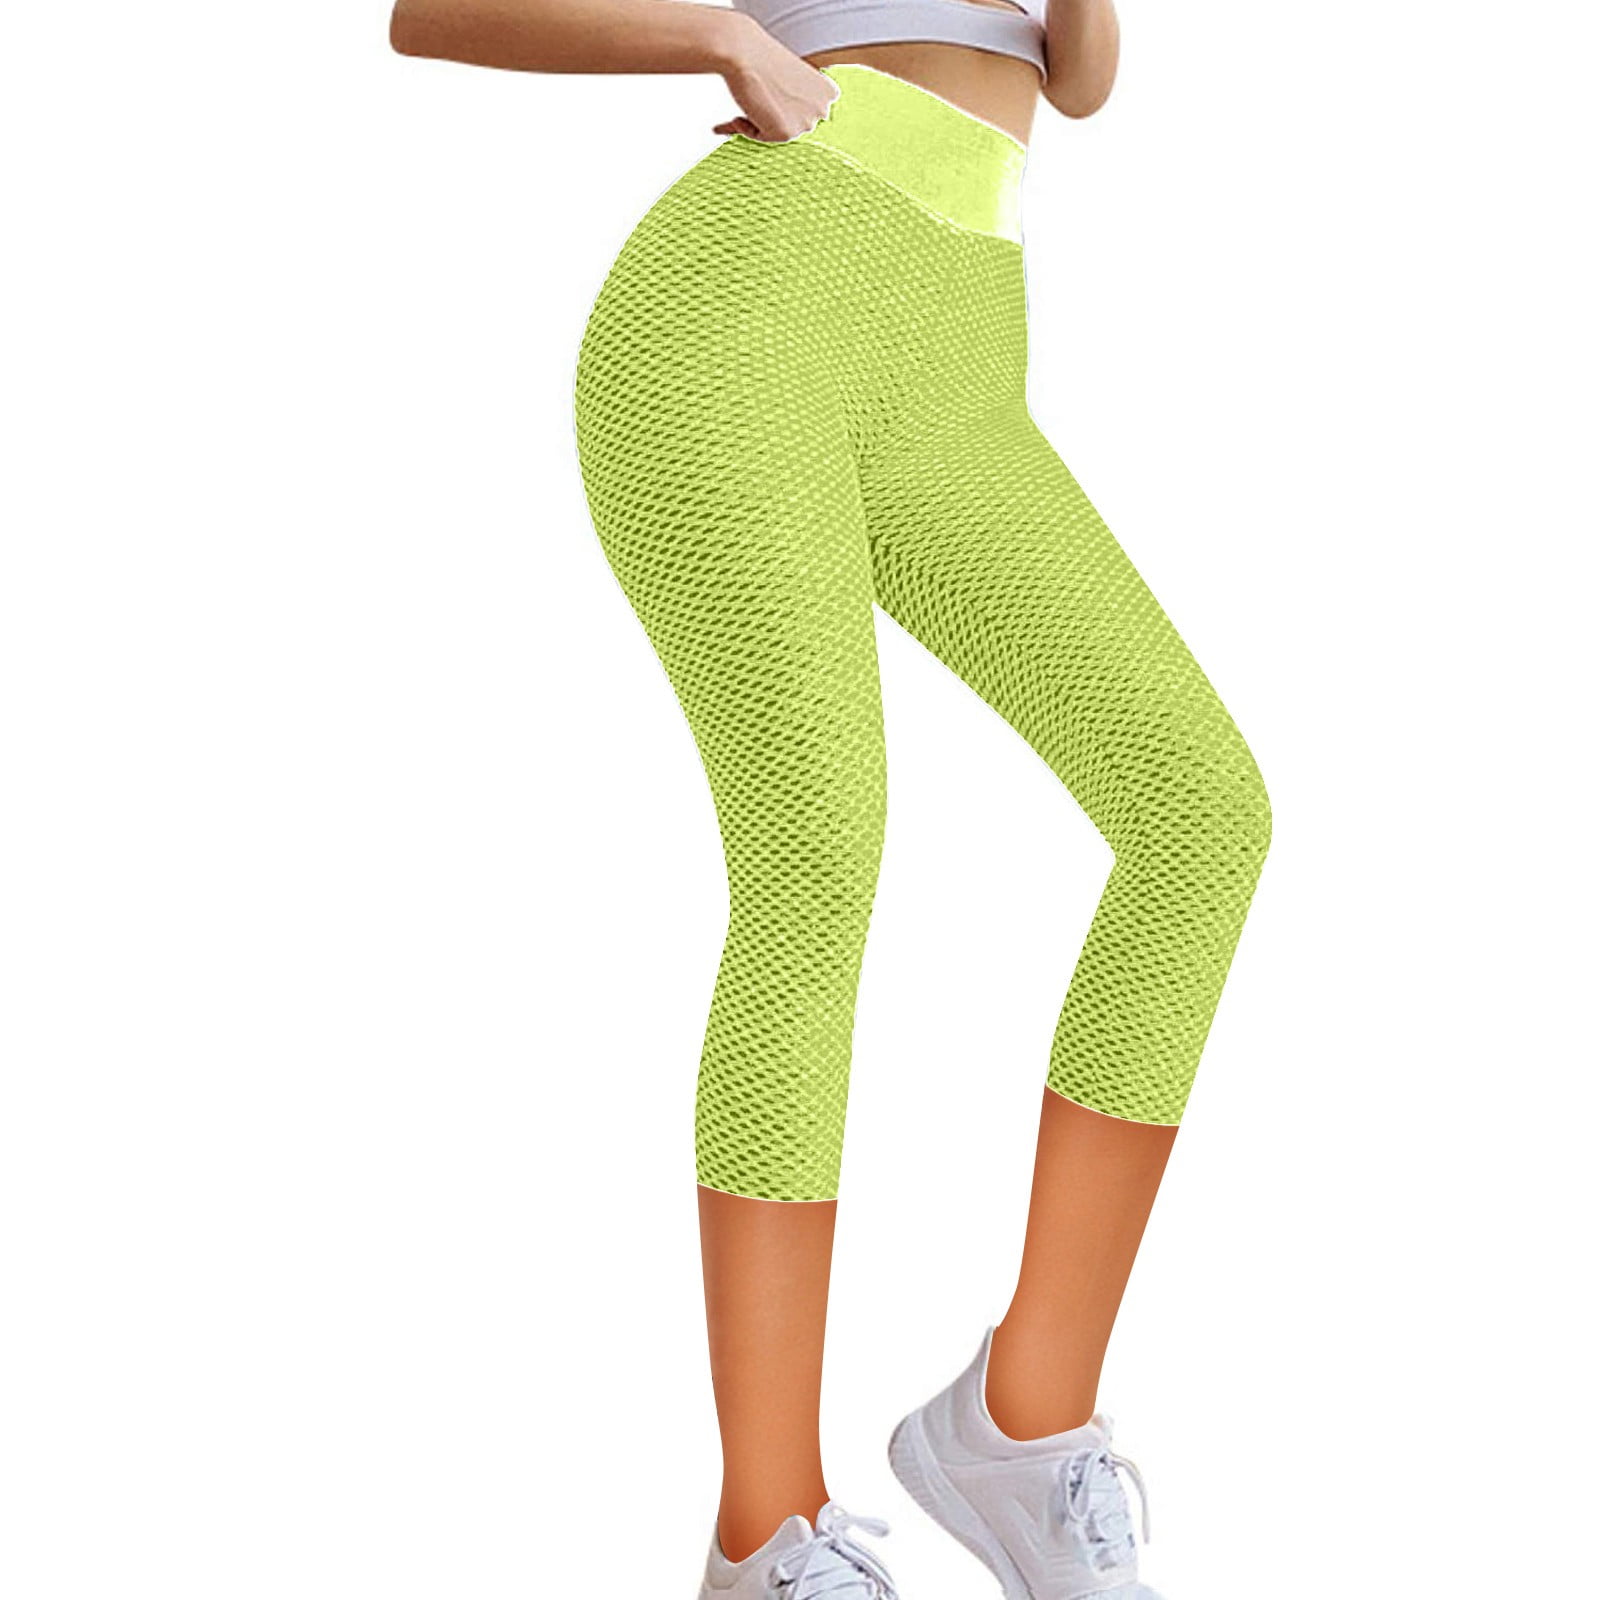 Women Stretch Yoga Leggings Fitness Running Sports Pockets Active Cropped Pants 